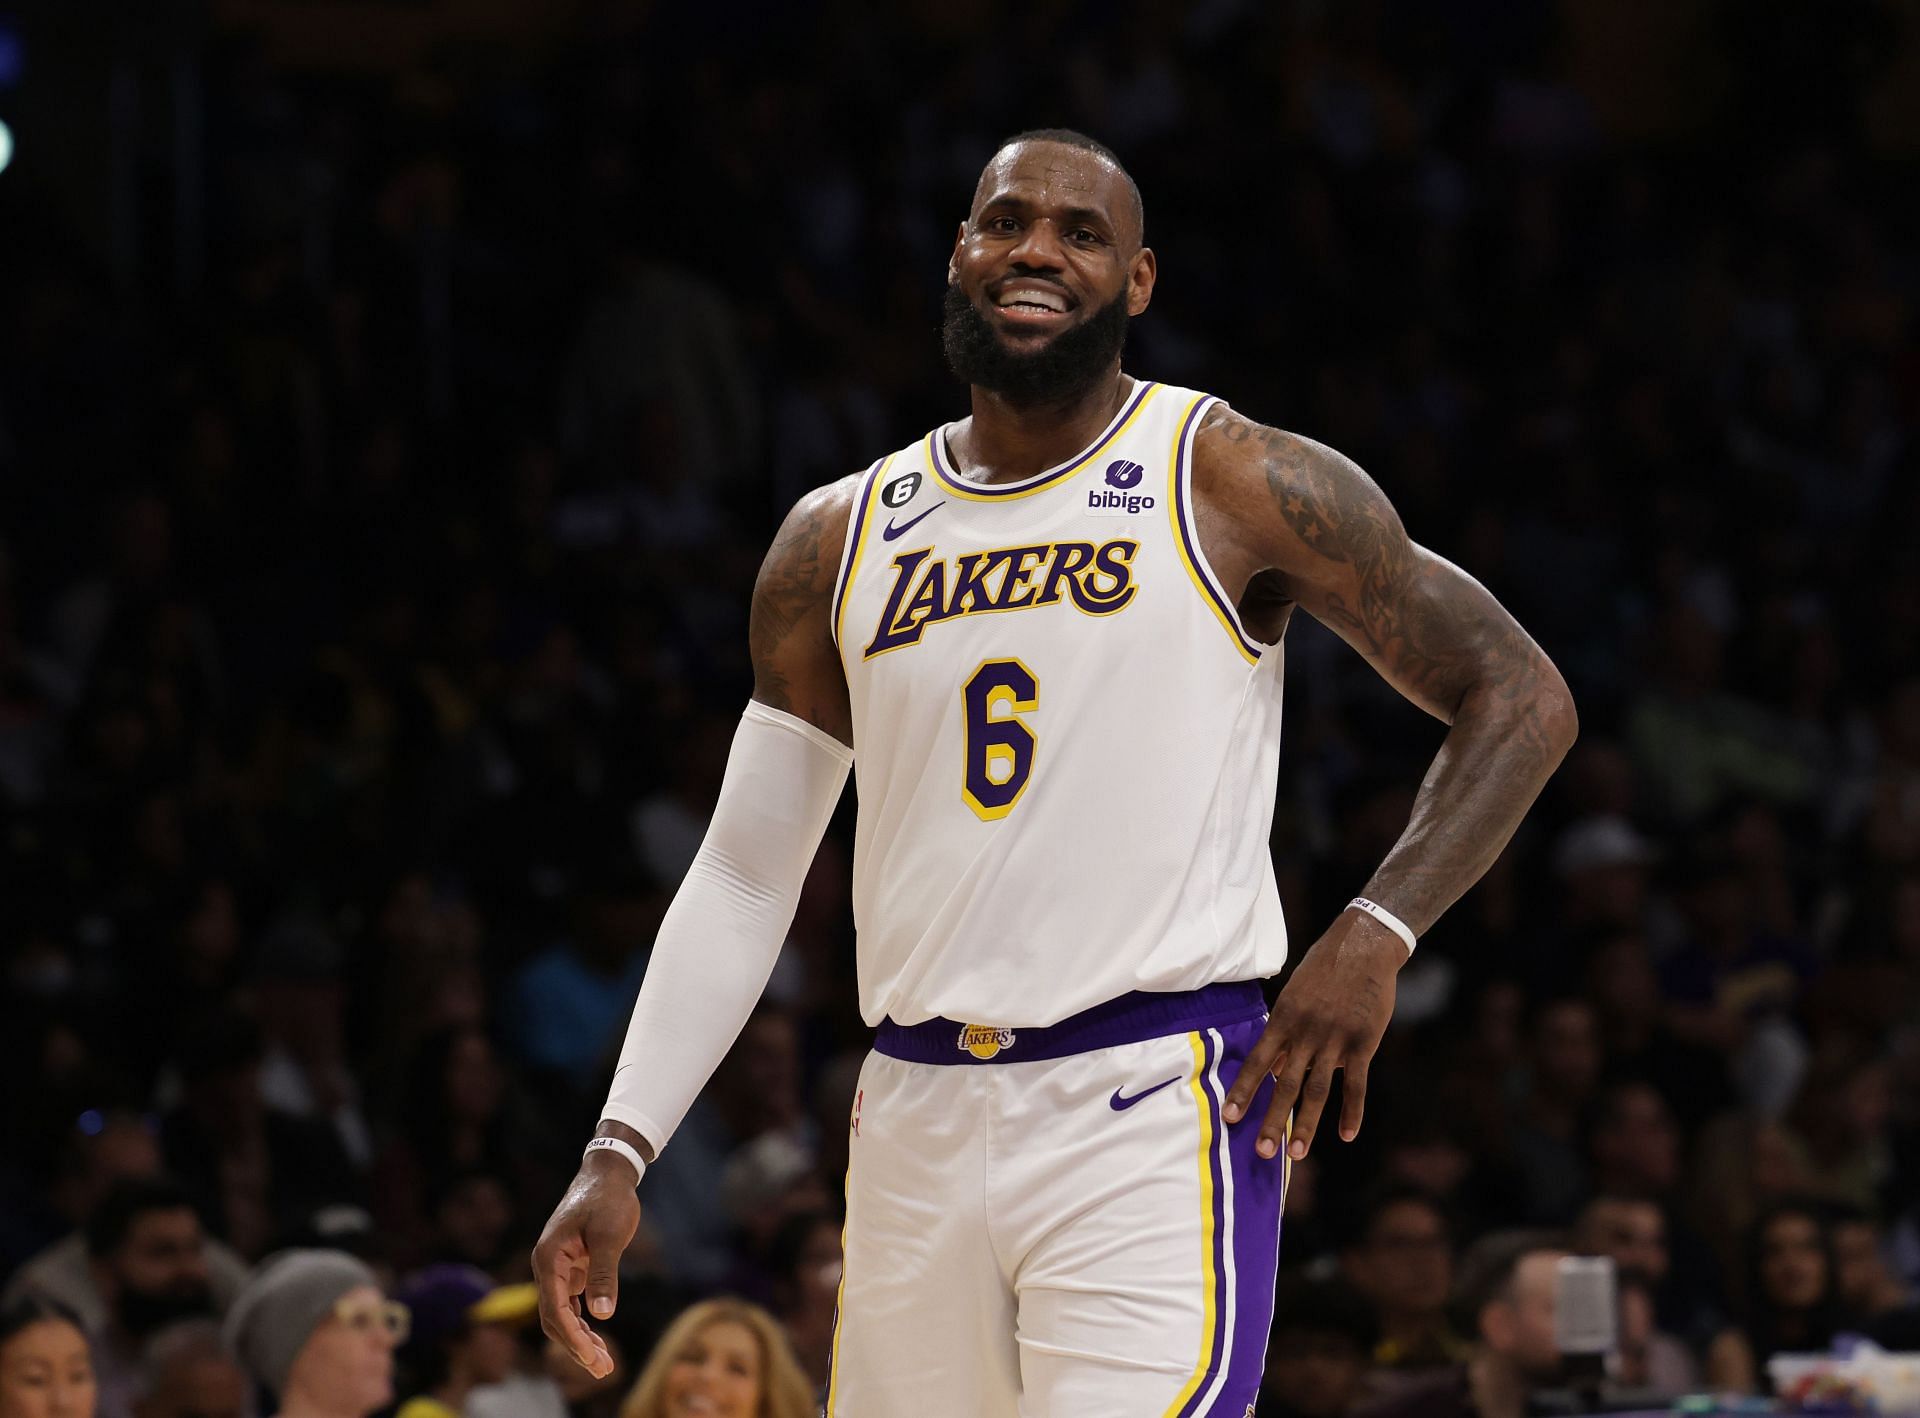 NBA fans are buying into LeBron James comments about LA Lakers trade rumors.